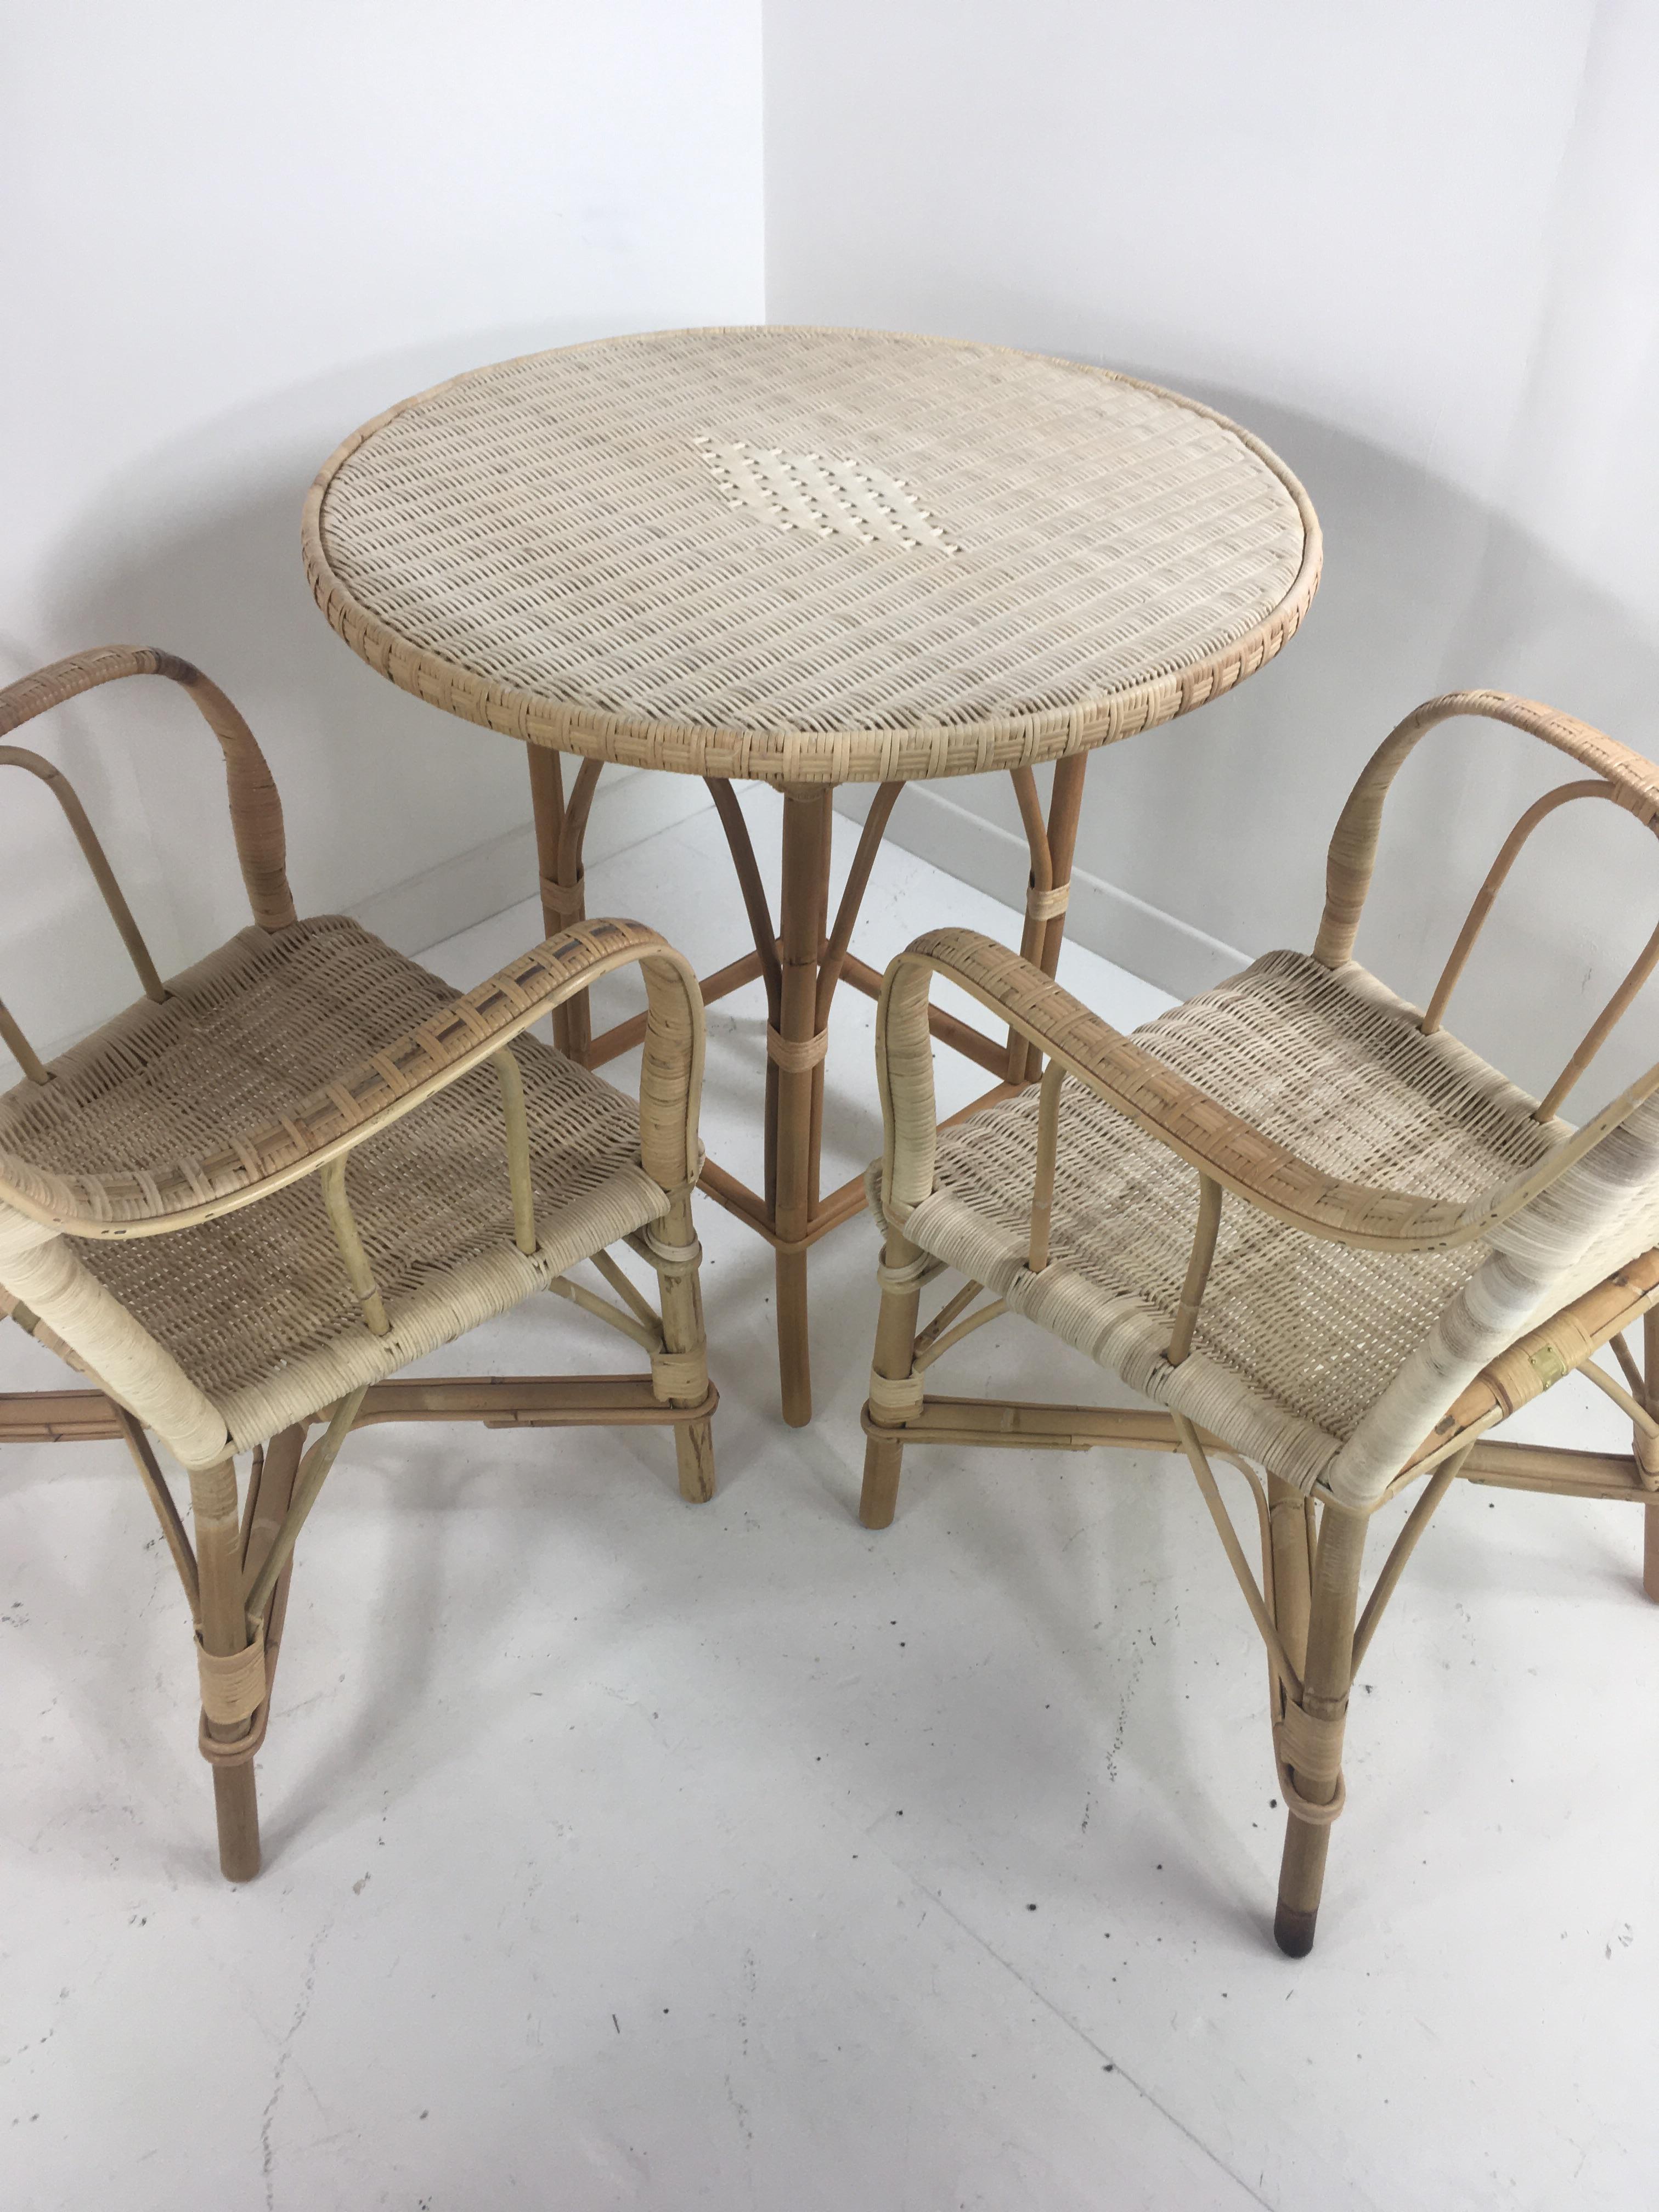 French 1900s Design Bistro Round Pedestal Table in Rattan and Wicker Cane For Sale 2